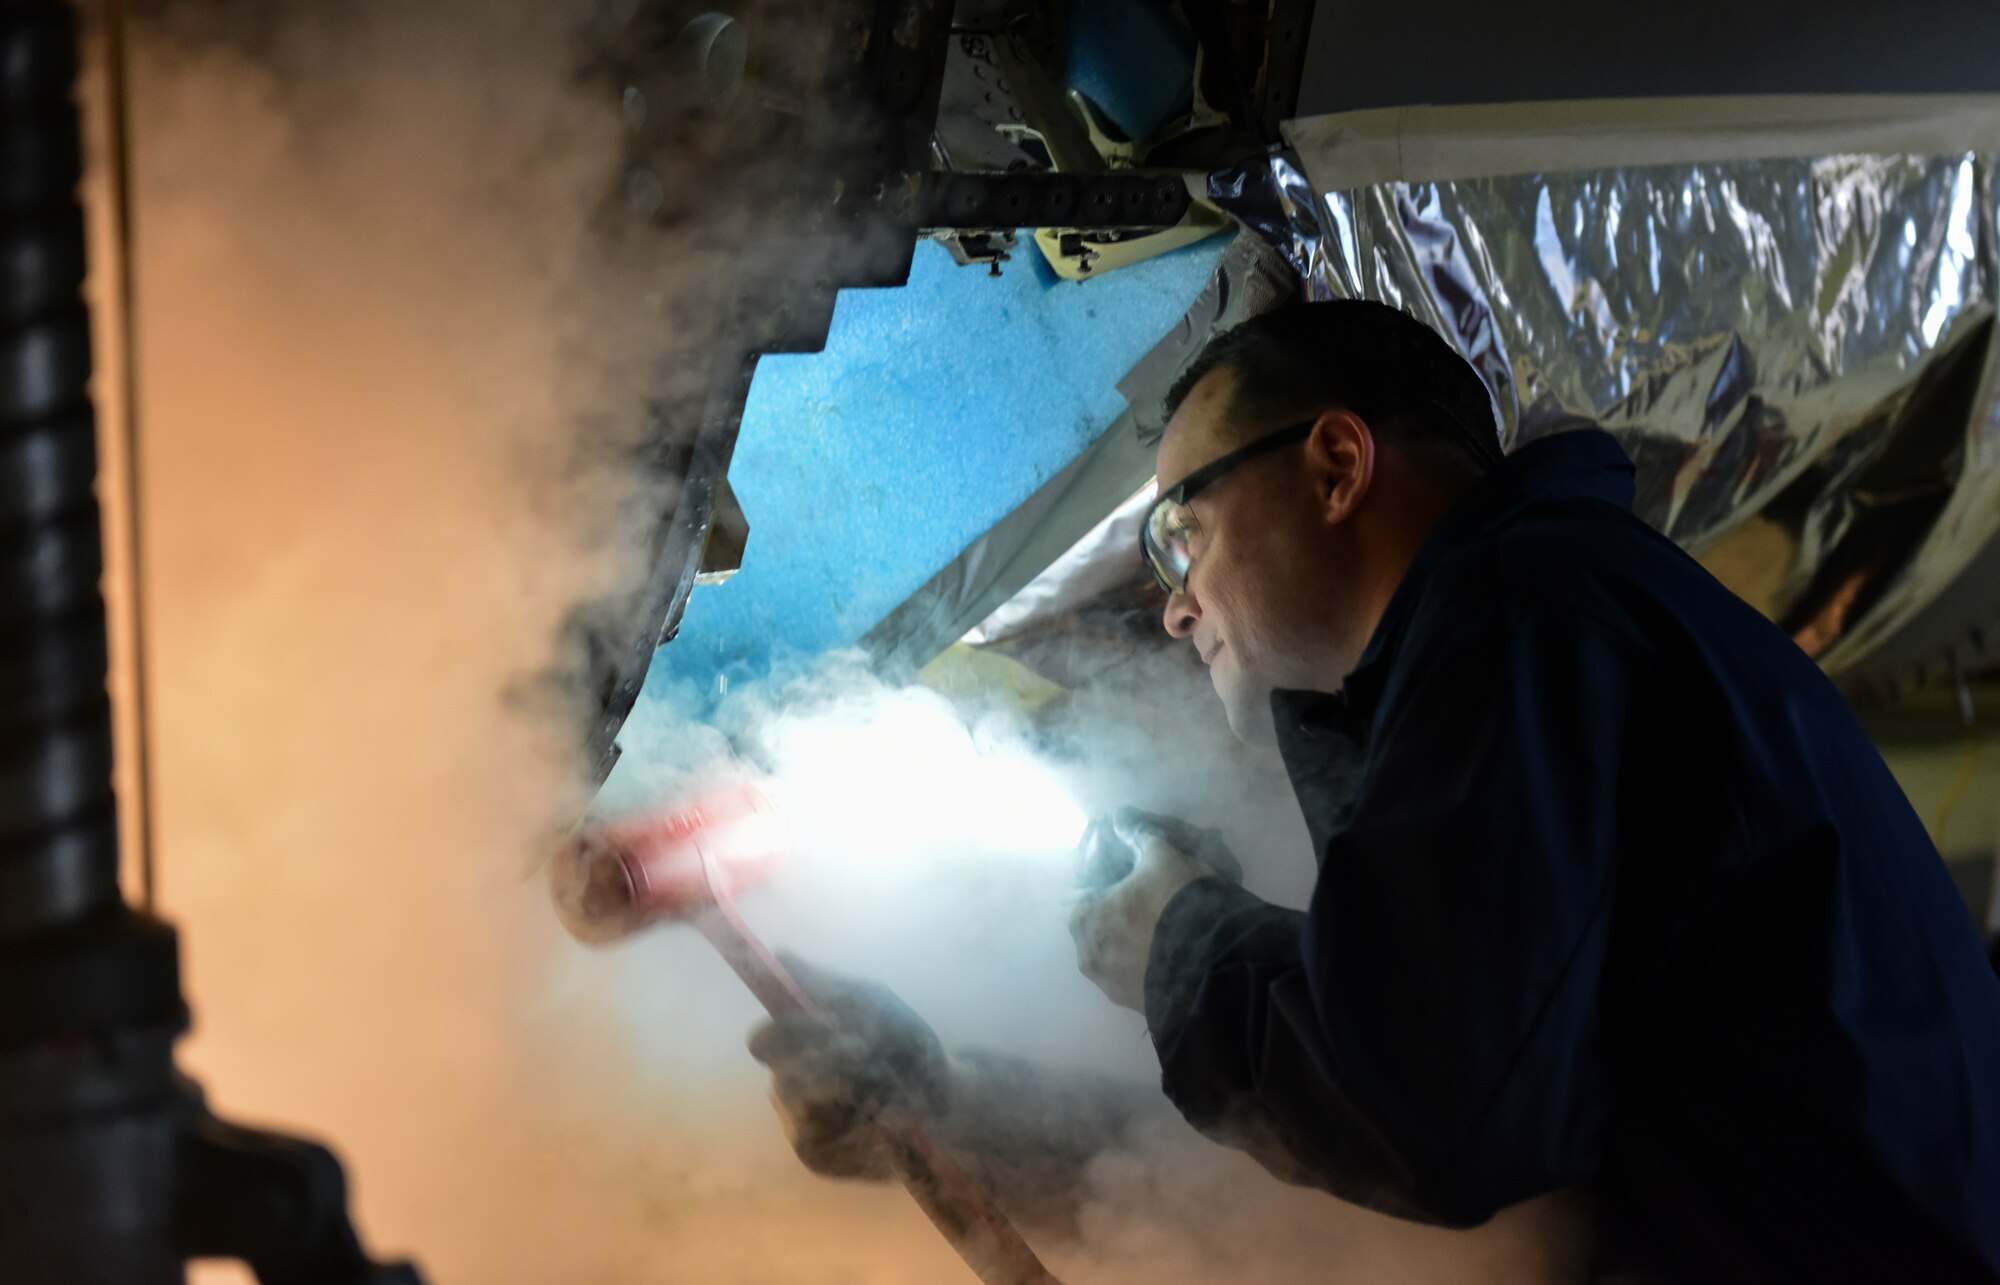 U.S. Air Force Staff Sgt. Joseph Gallegos, 309th Aircraft Maintenance Group depot structural maintenance specialist from Hill Air Force Base, Utah, attempts to remove the bulkhead of an F-16 Fighting Falcon with liquid nitrogen at Kunsan Air Base, Republic of Korea, Nov. 8, 2018. Replacement parts are being installed to change dated parts on F-16s in the Wolf Pack fleet and to sharpen the 8 Fighter Wing’s lethality. (U.S. Air Force photo by Senior Airman Stefan Alvarez)